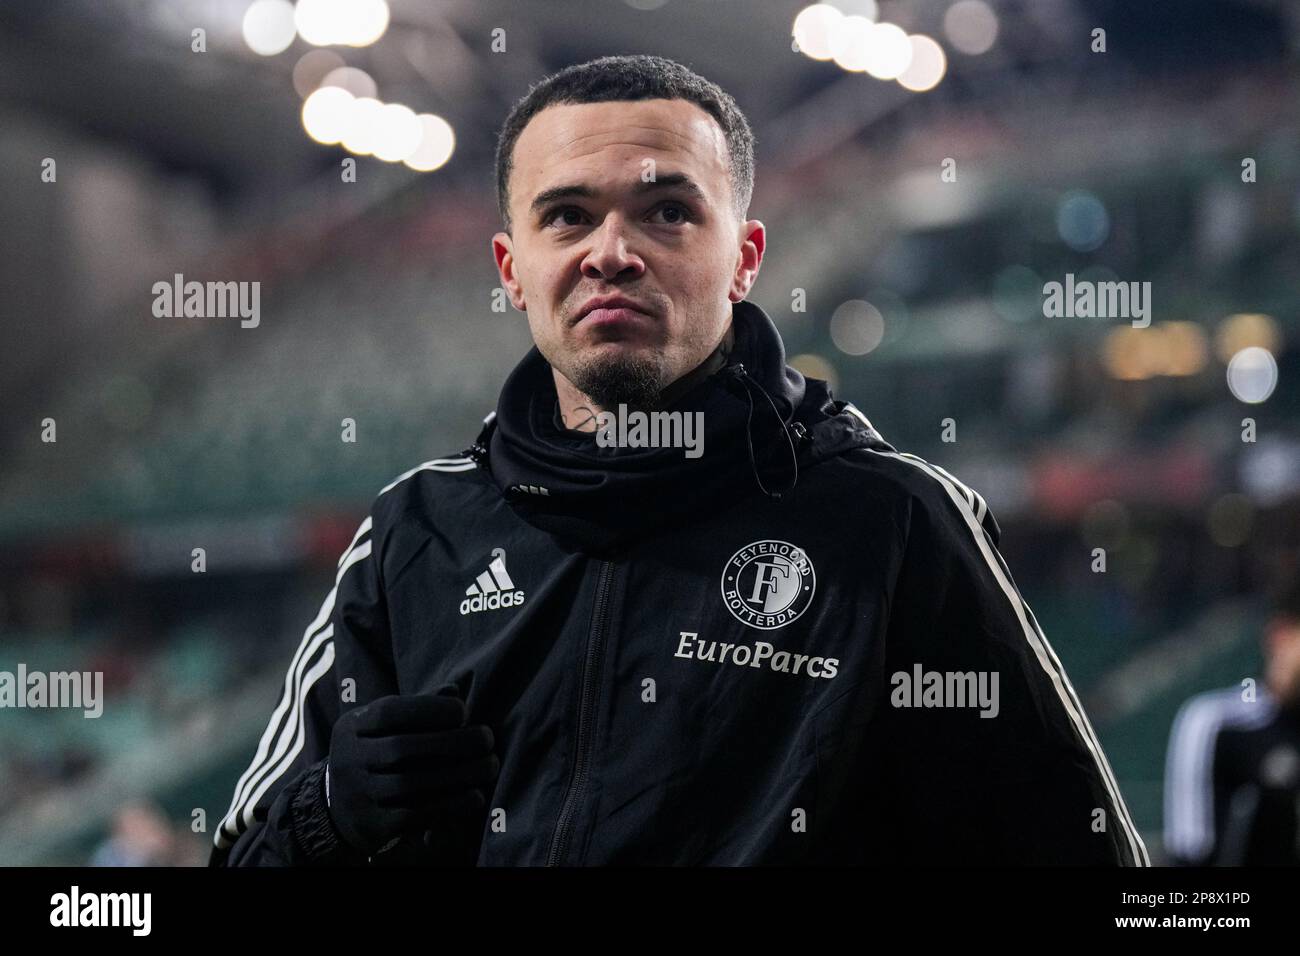 Warsaw - Quilindschy Hartman of Feyenoord during the match between Shakhtar Donetsk v Feyenoord at Stadion Wojska Polskiego on 9 March 2023 in Warsaw, Poland. (Box to Box Pictures/Yannick Verhoeven) Stock Photo